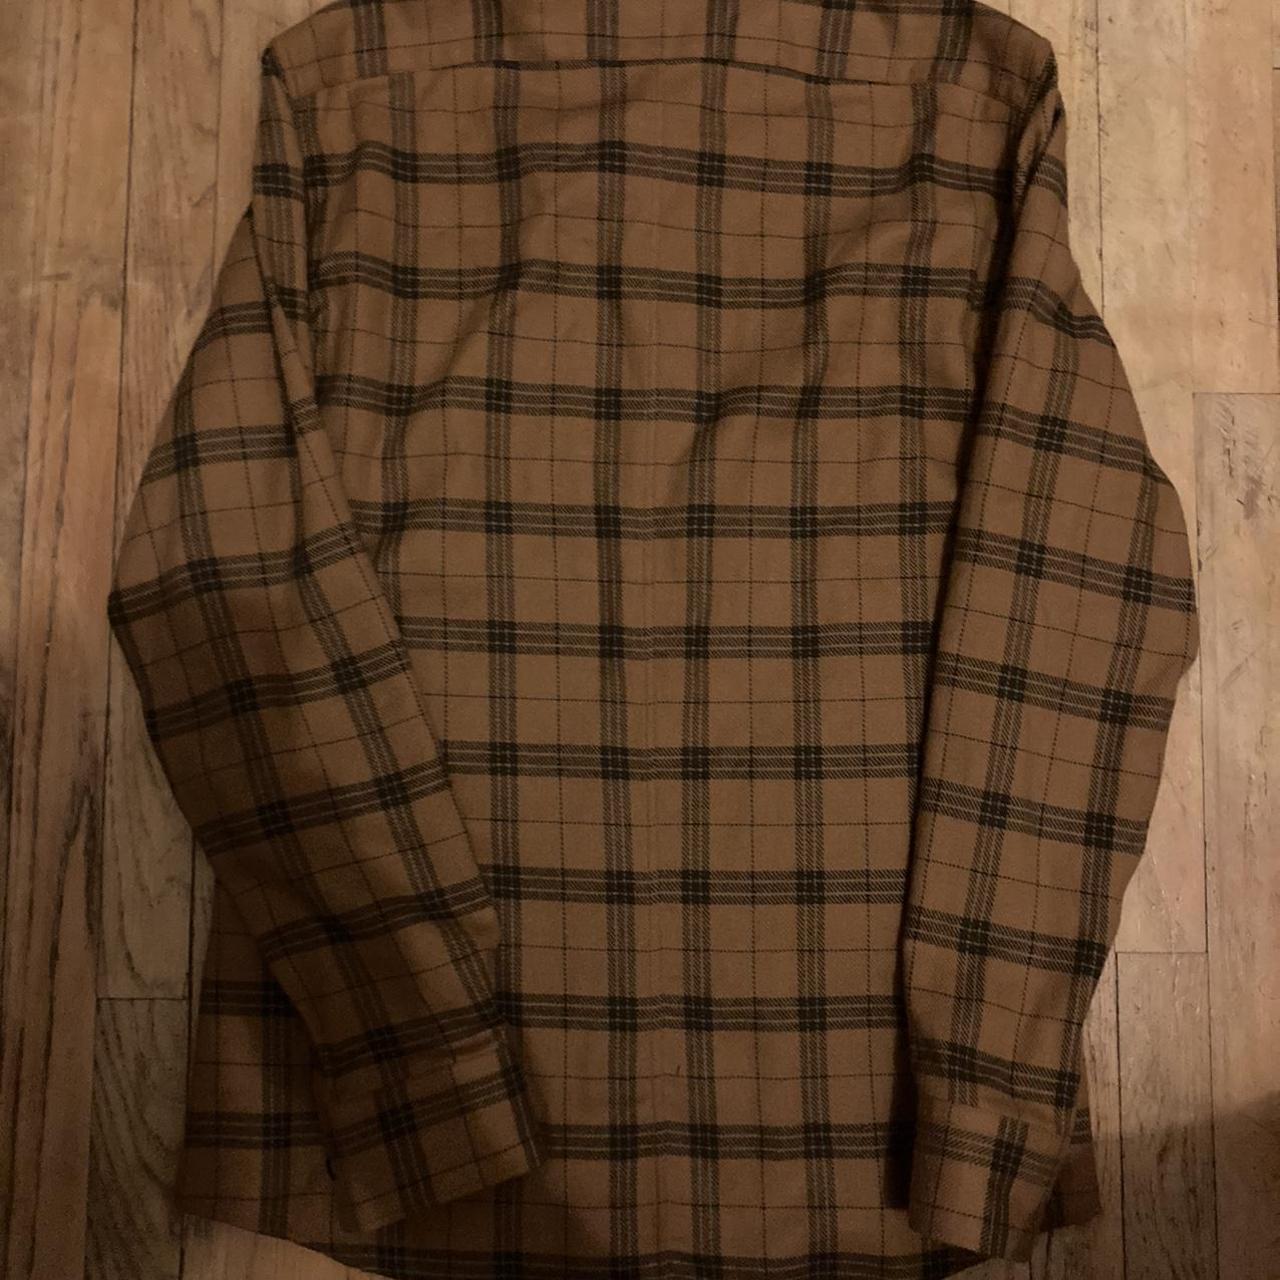 Product Image 3 - Dries Van Noten Flannel Shirt

Listed